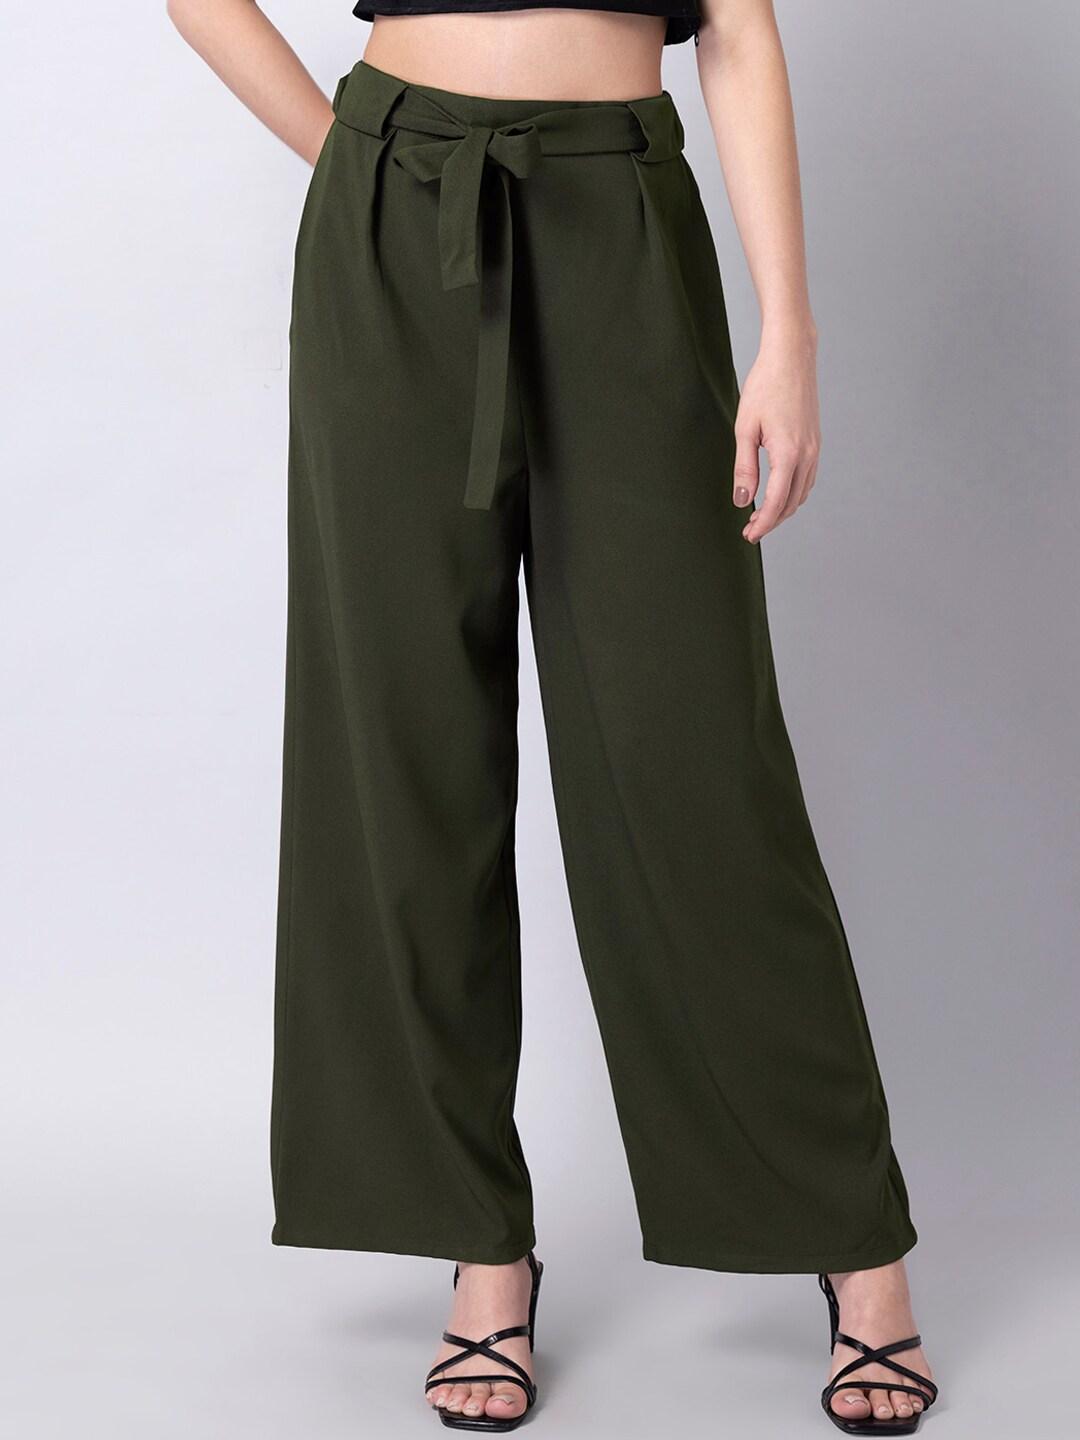 faballey women olive green pleated trousers